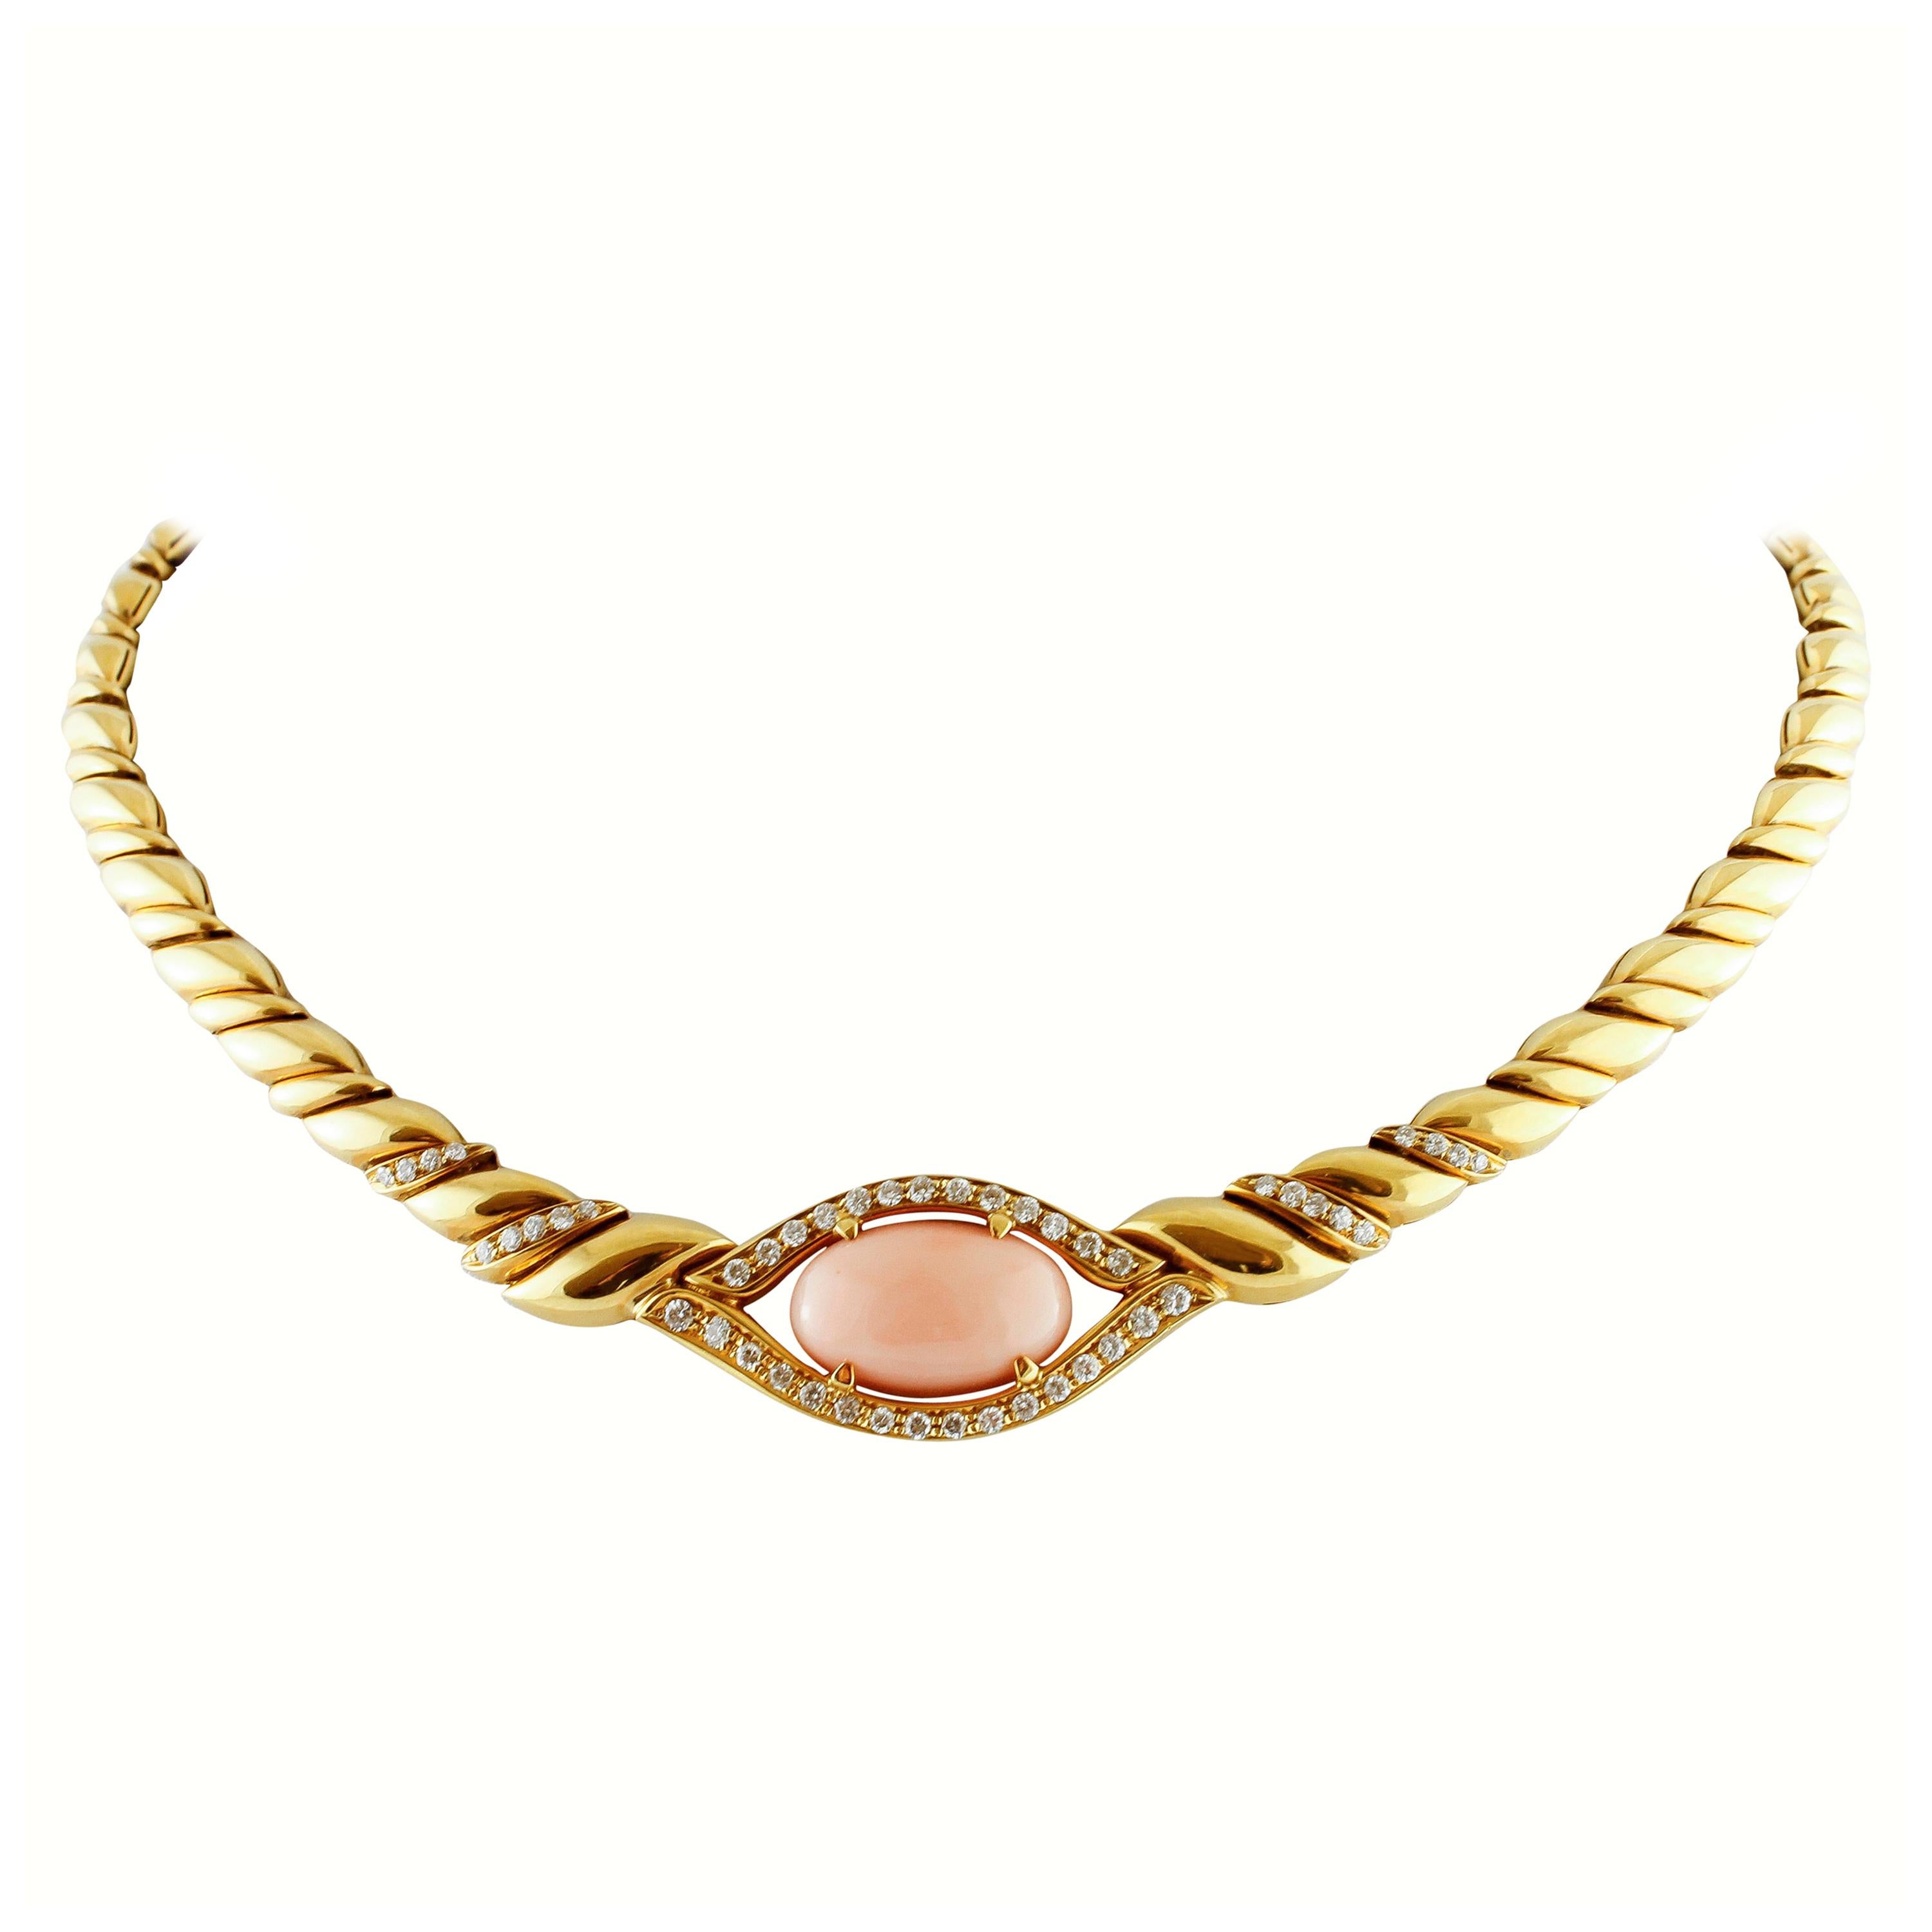 Diamonds, Angel Skin Pink Coral, 18 Karat Gold French Style Chain Necklace